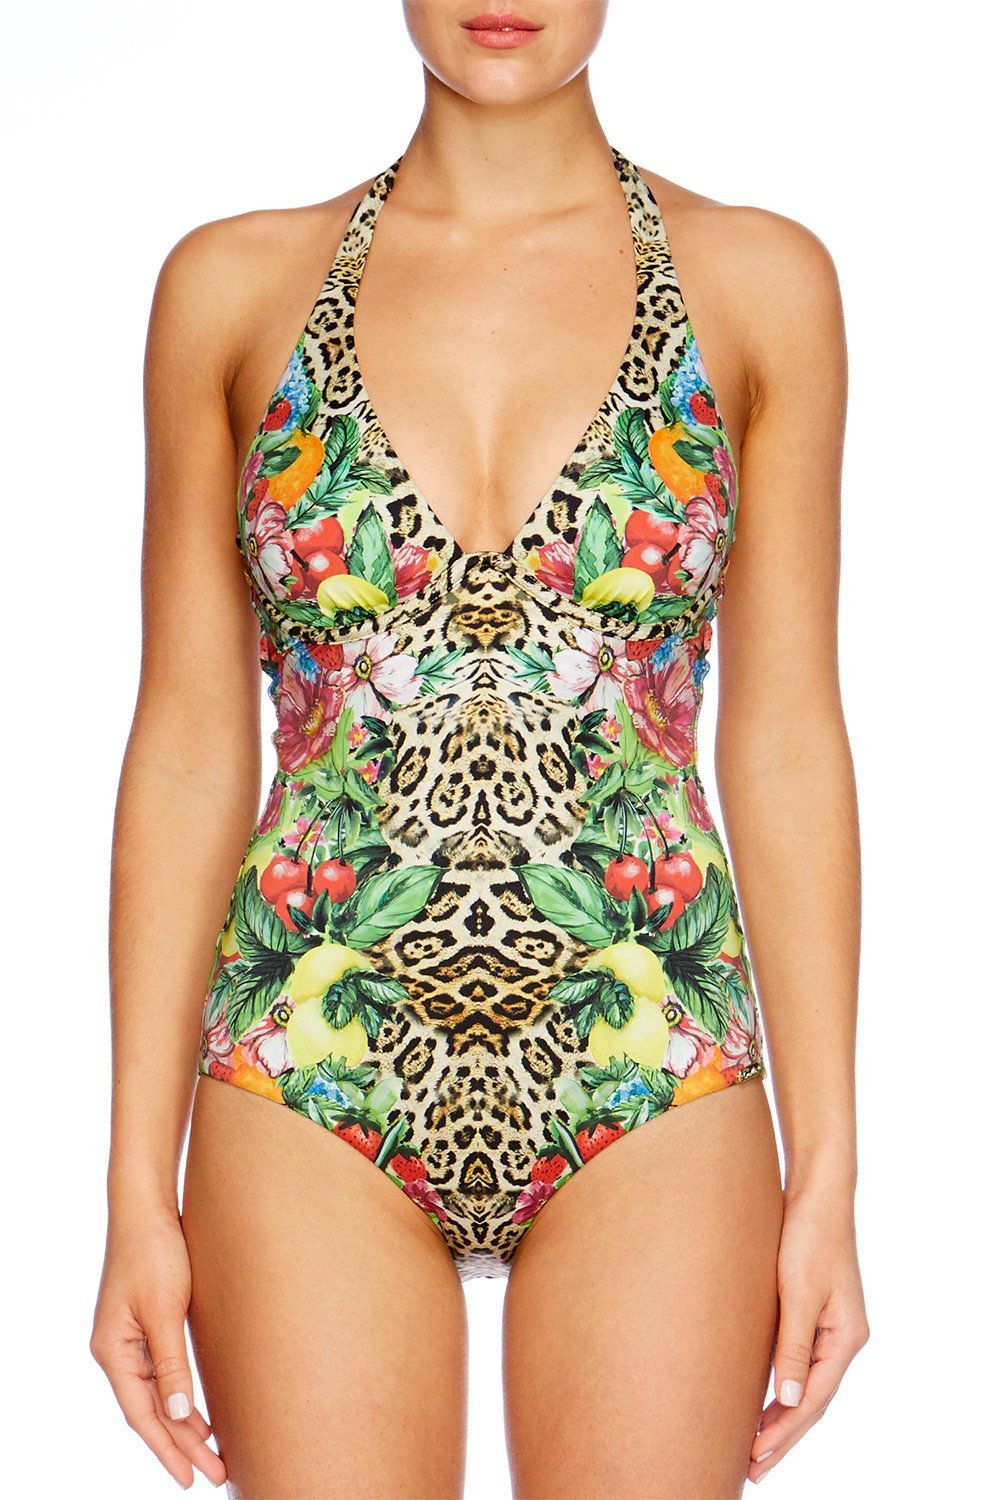 COOL CAT WIRED HALTER ONE PIECE